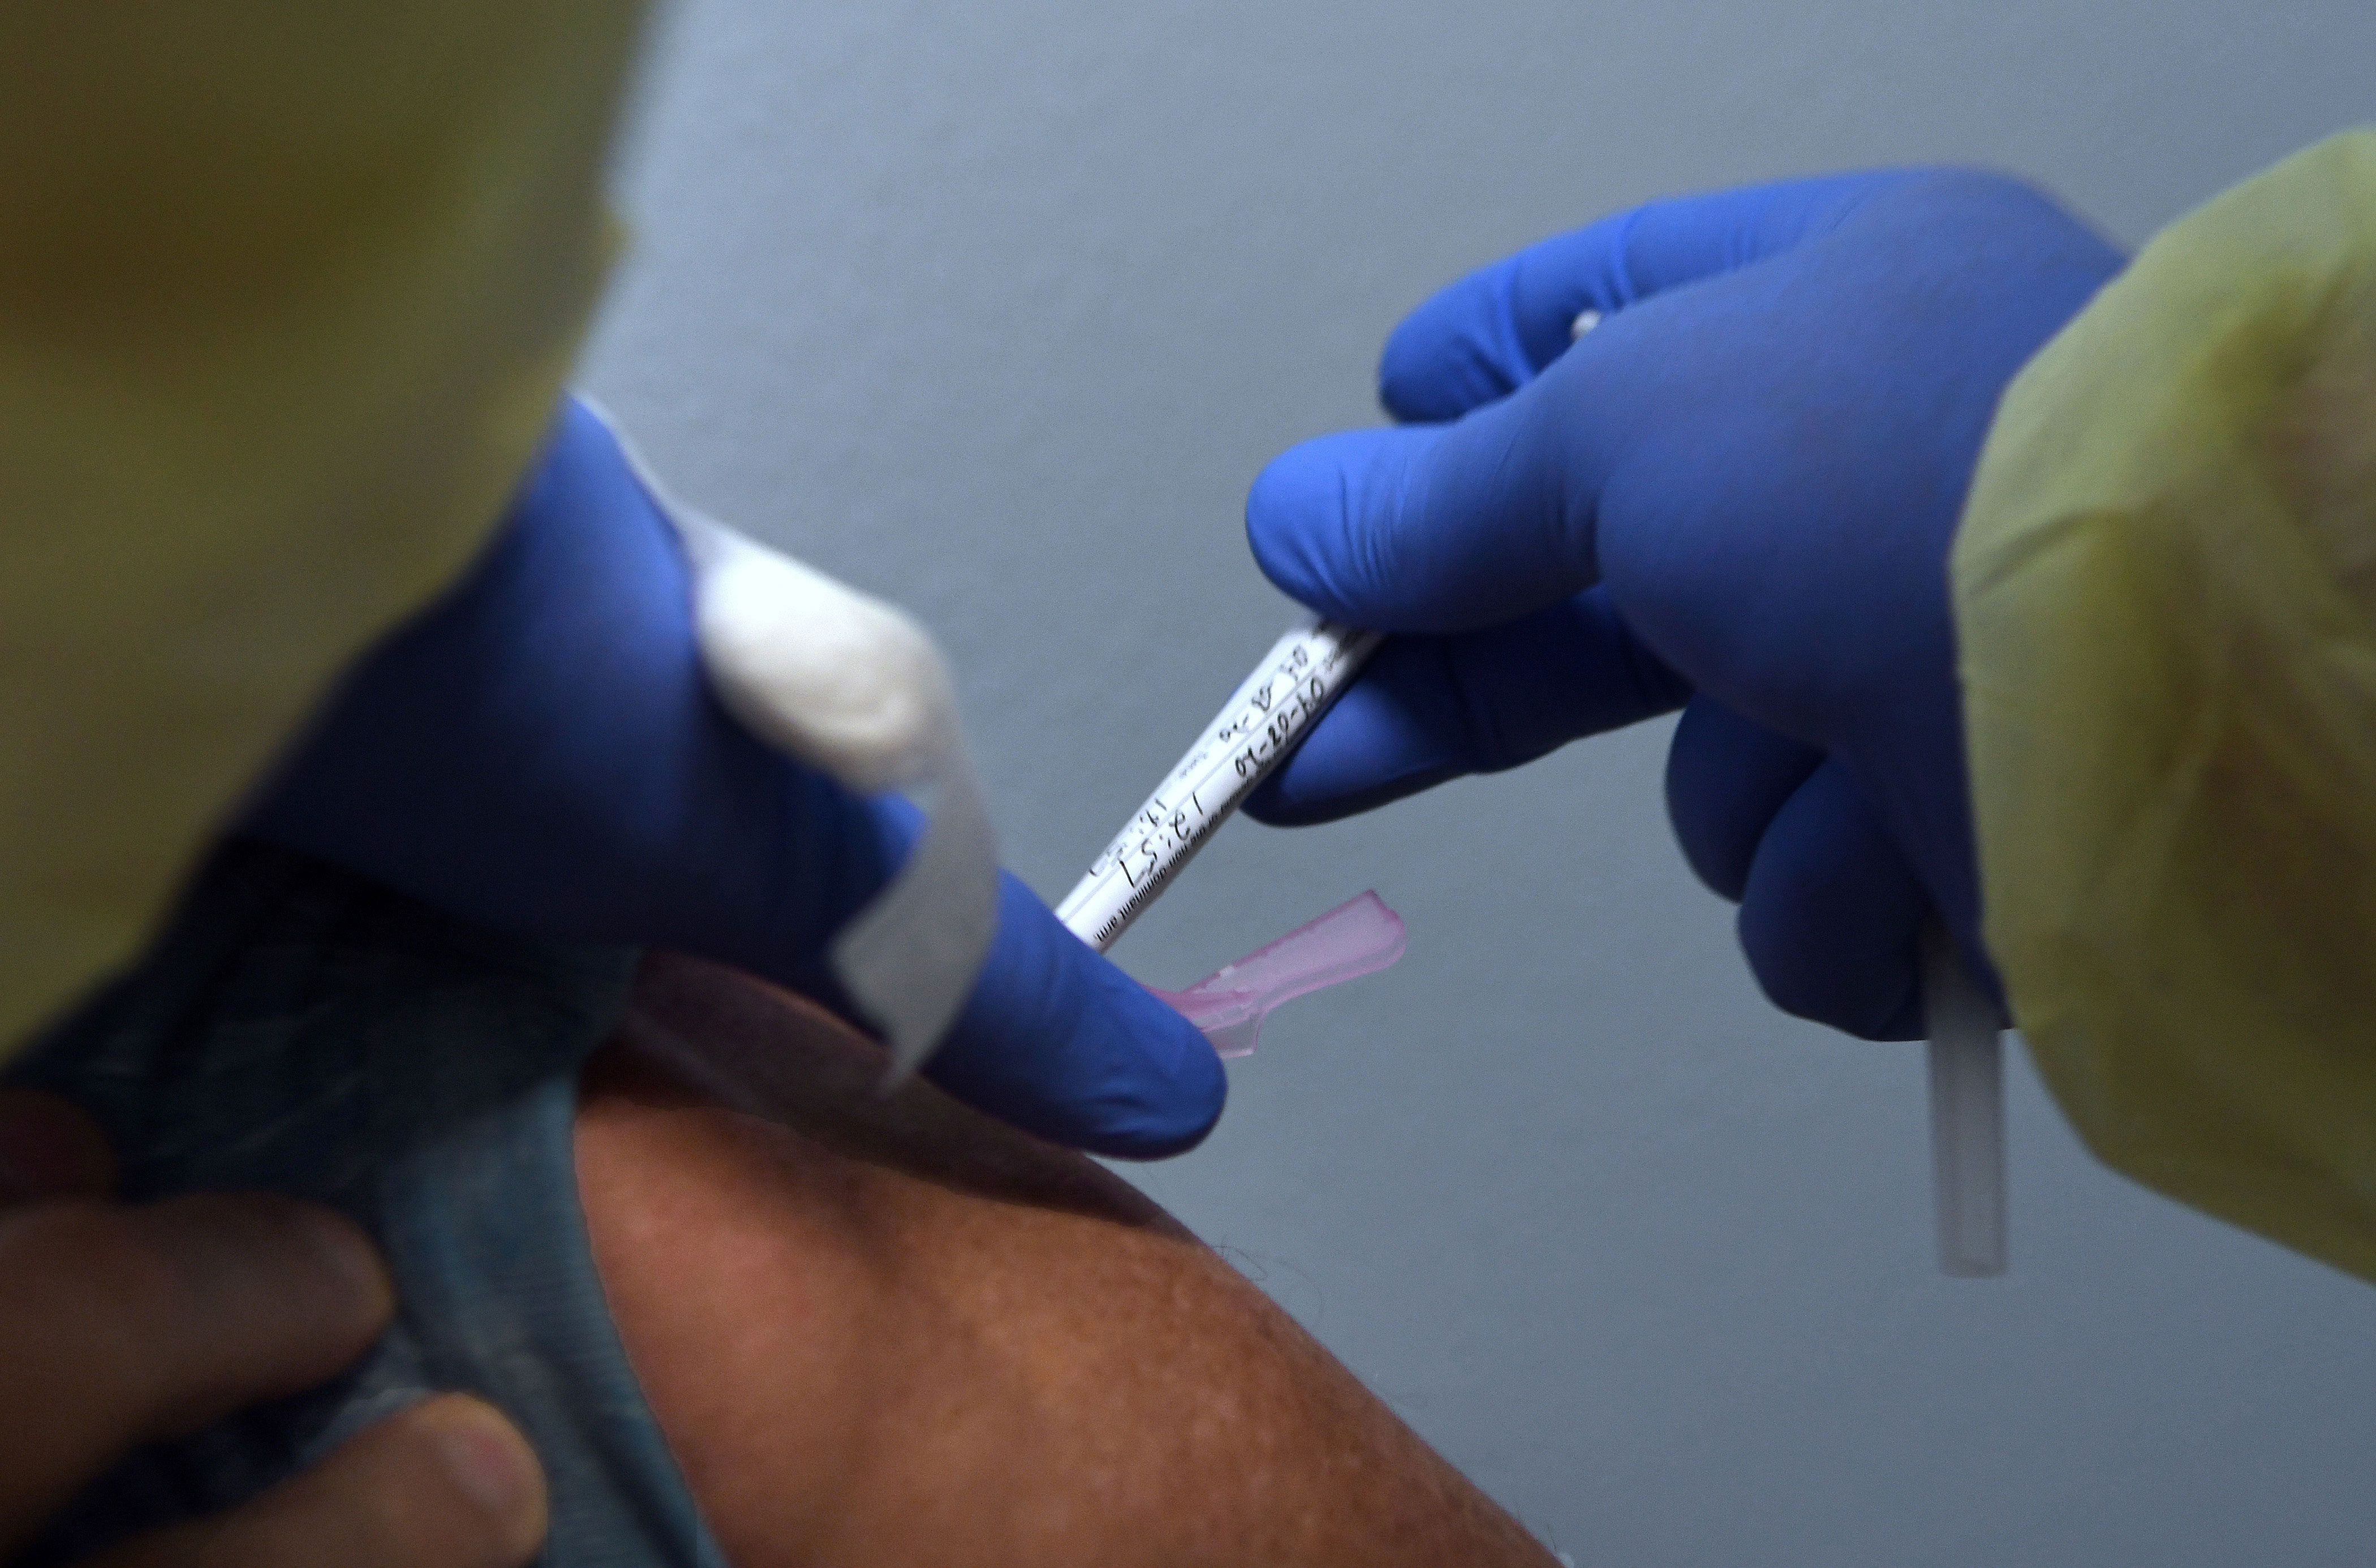 A man in DeLand, Florida, receives an injection on August 4 as part of a Phase 3 Covid-19 vaccine clinical trial, sponsored by Moderna.